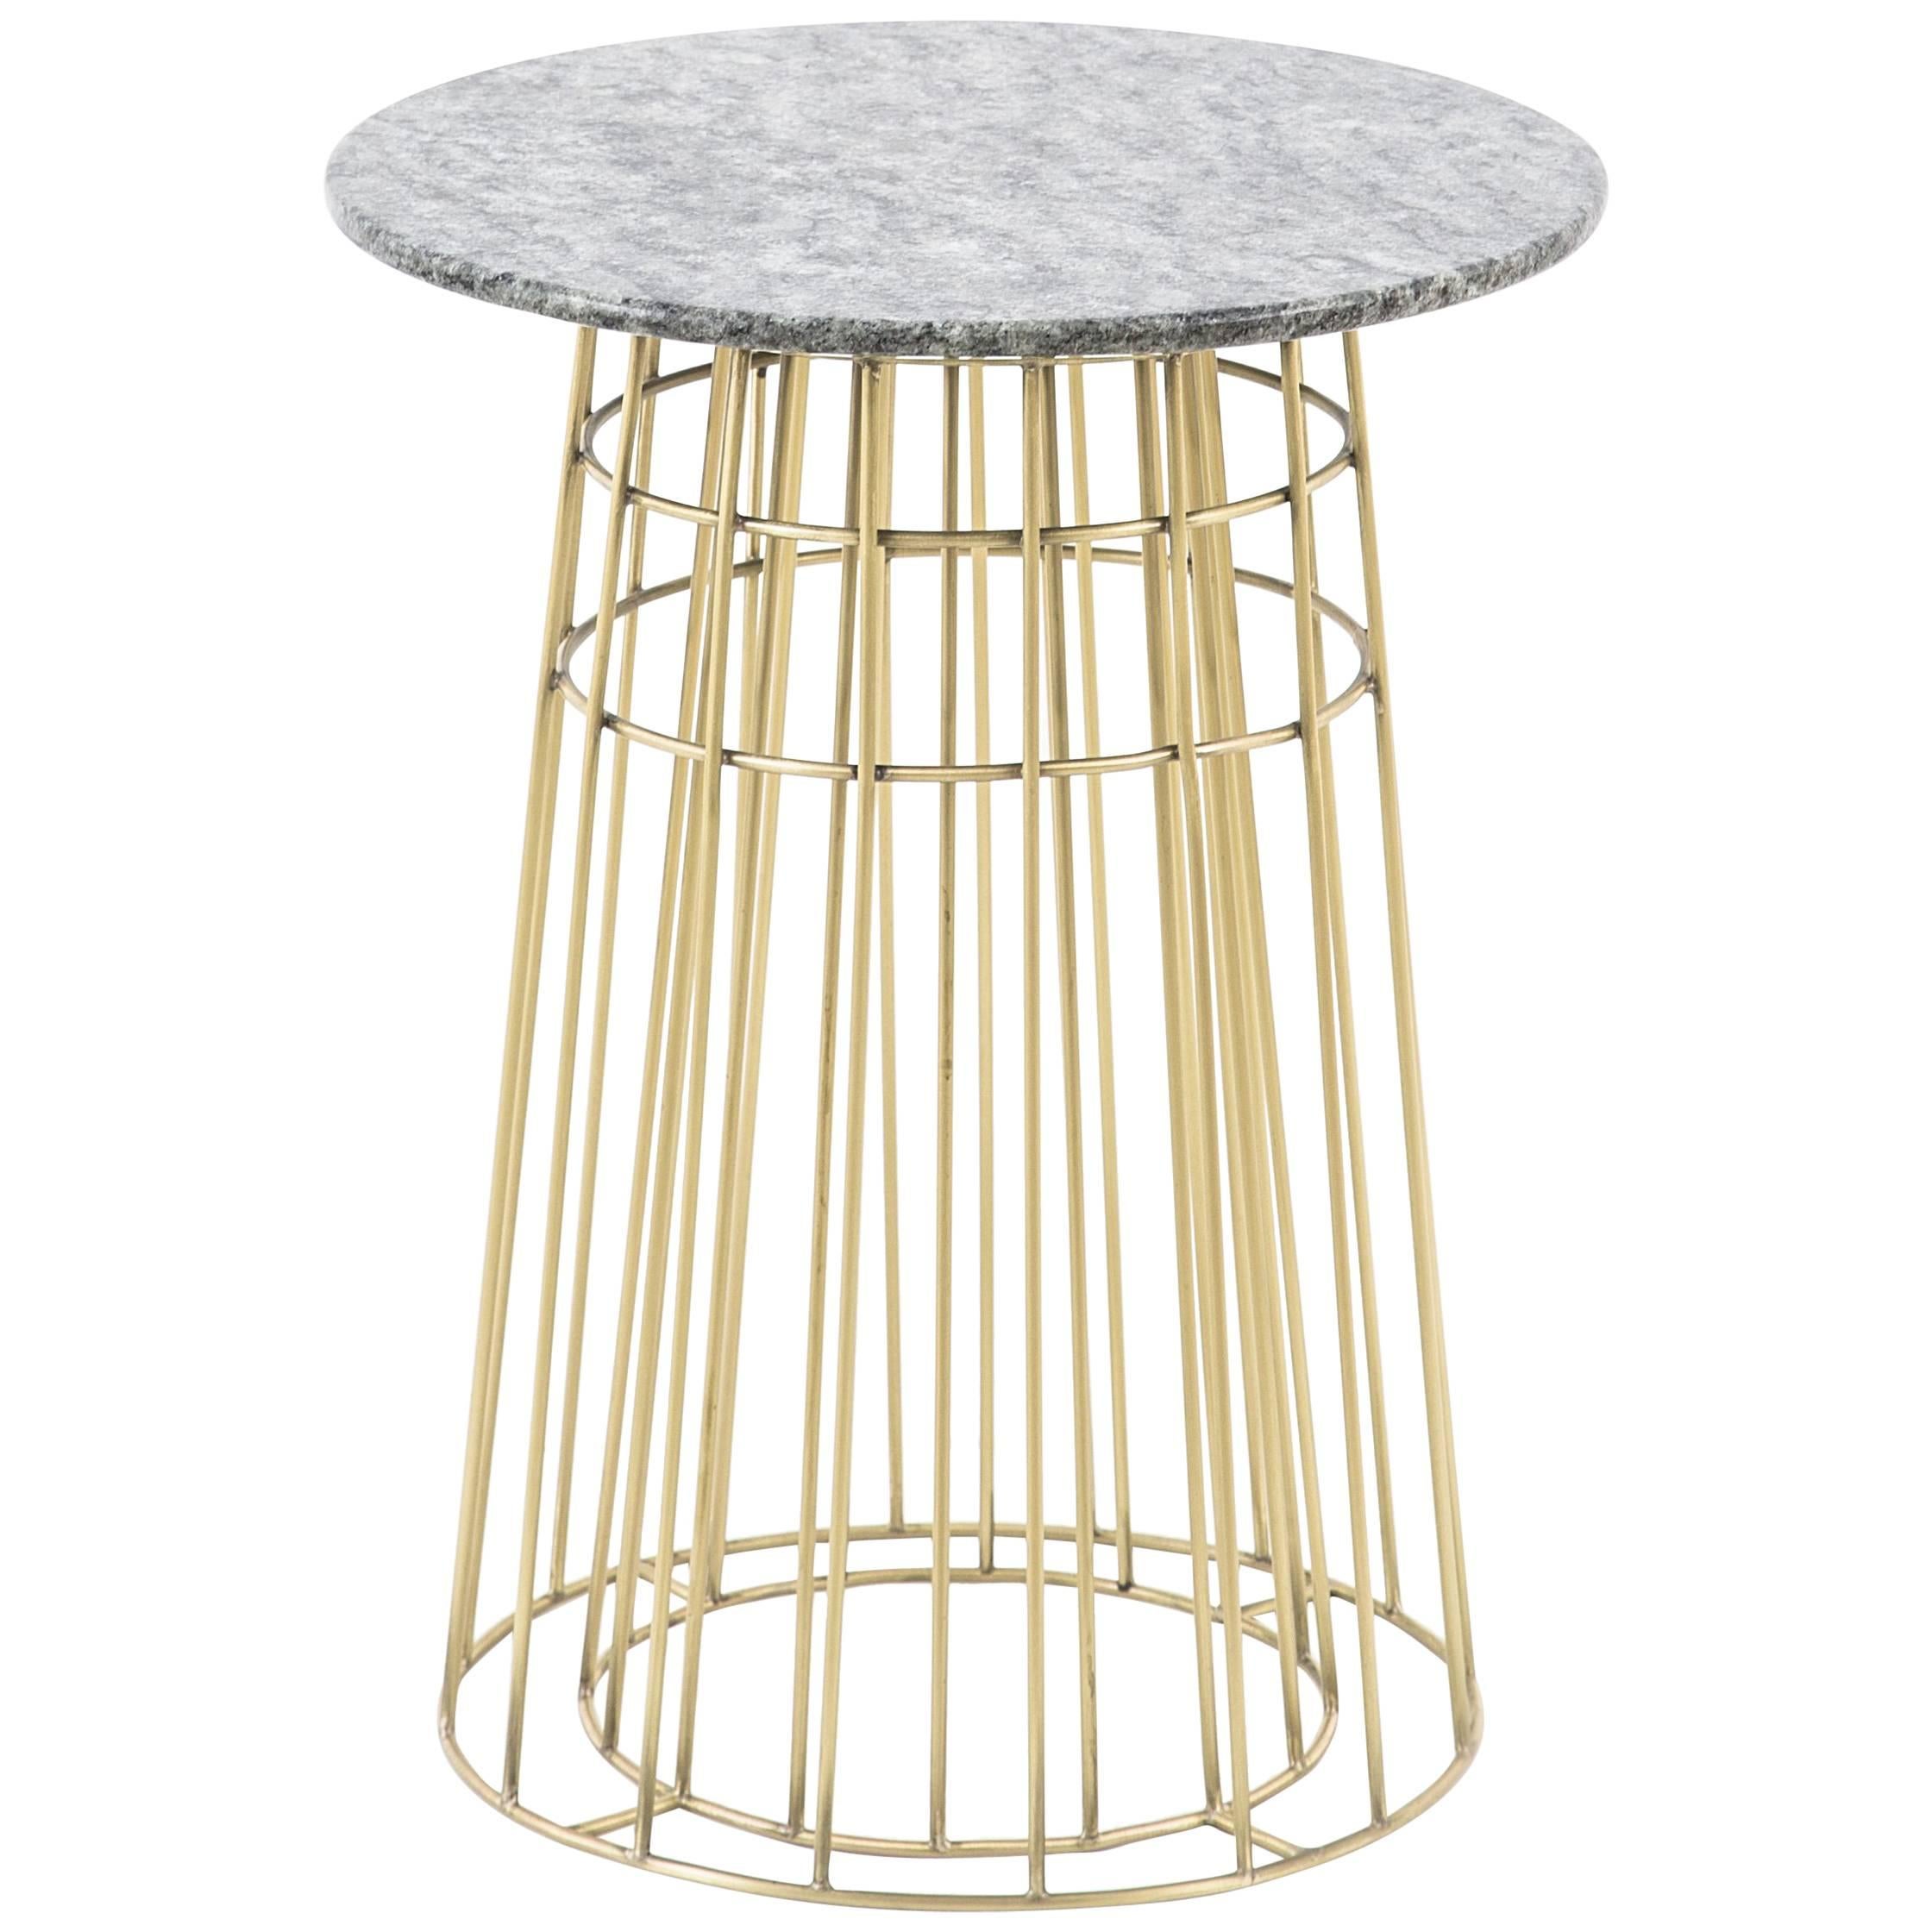 Rami sculptural Granite and Brass Side Table